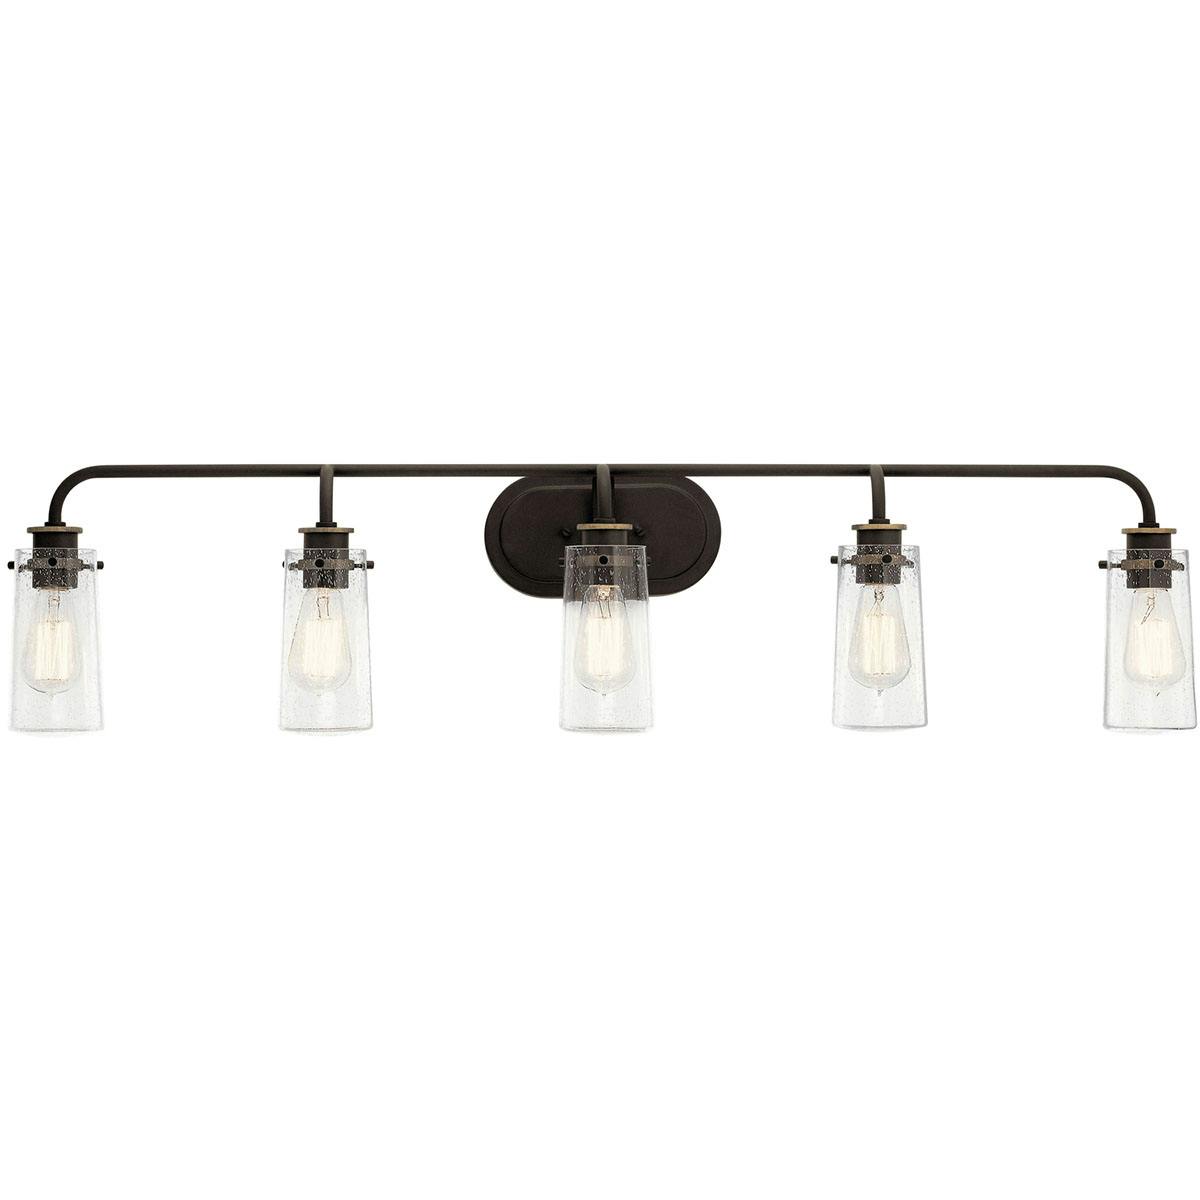 Front view of the Braelyn 5 Light Vanity Light Olde Bronze® on a white background